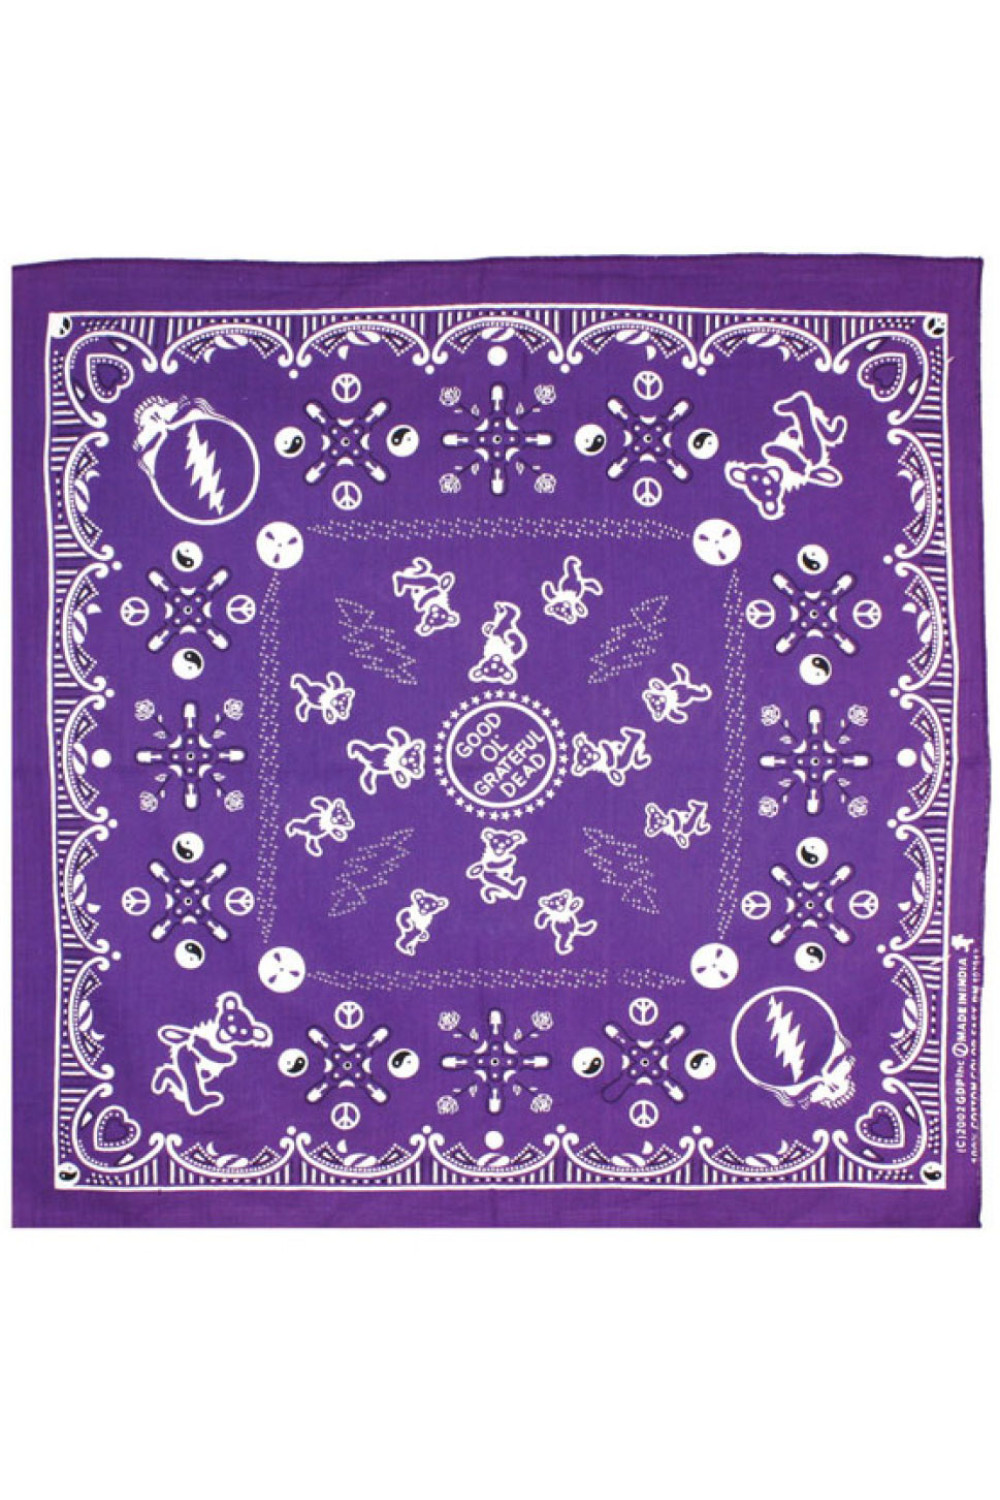 Good Ol' Grateful Dead Bandana Purple 22x22 **RESERVE NOW FOR AUGUST DELIVERY**  